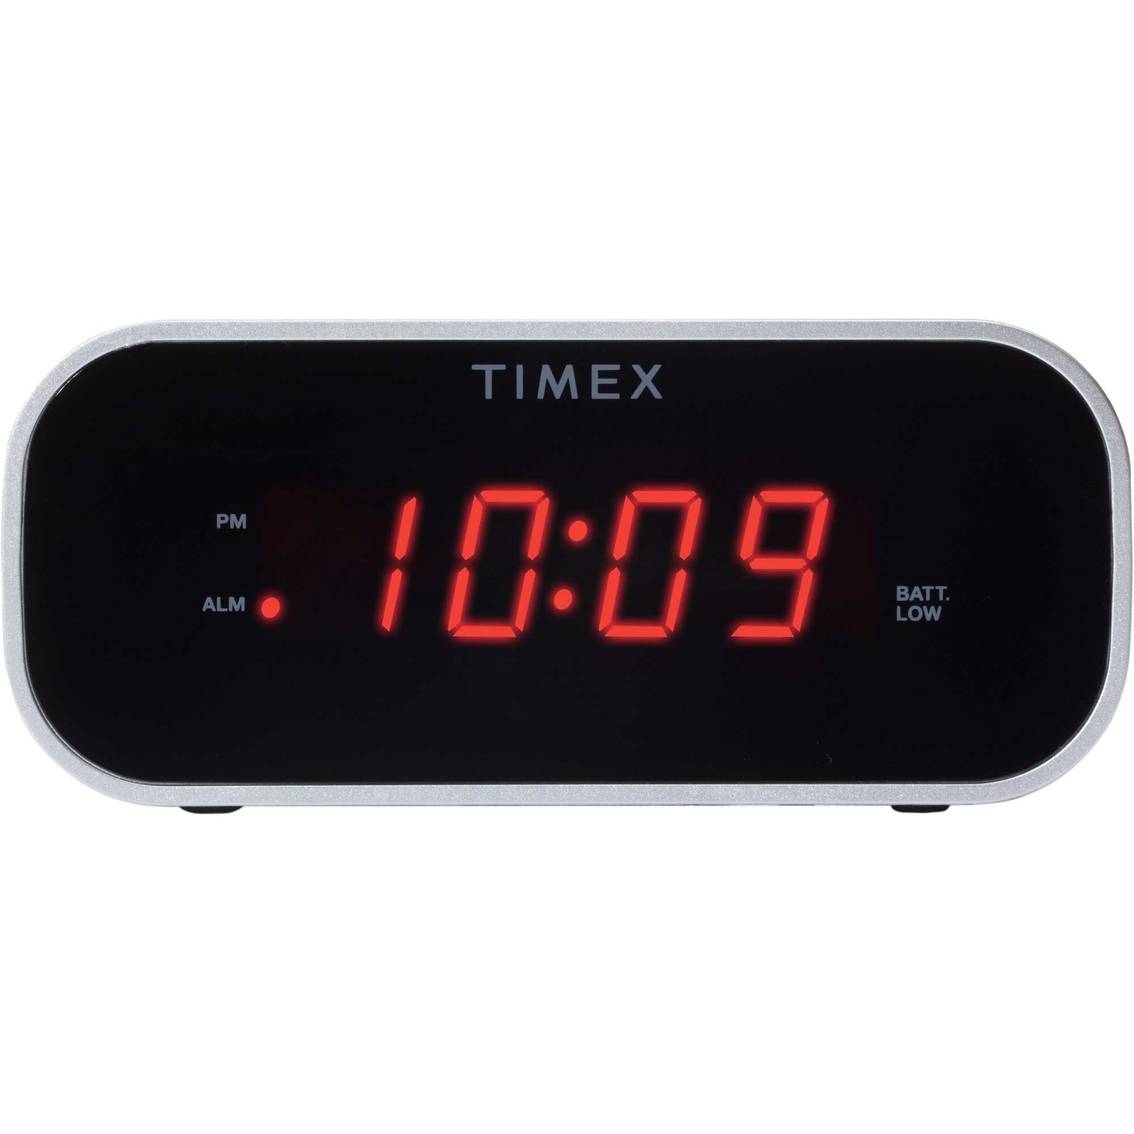 Timex T121s Alarm Clock with .7 Red Display (Silver)